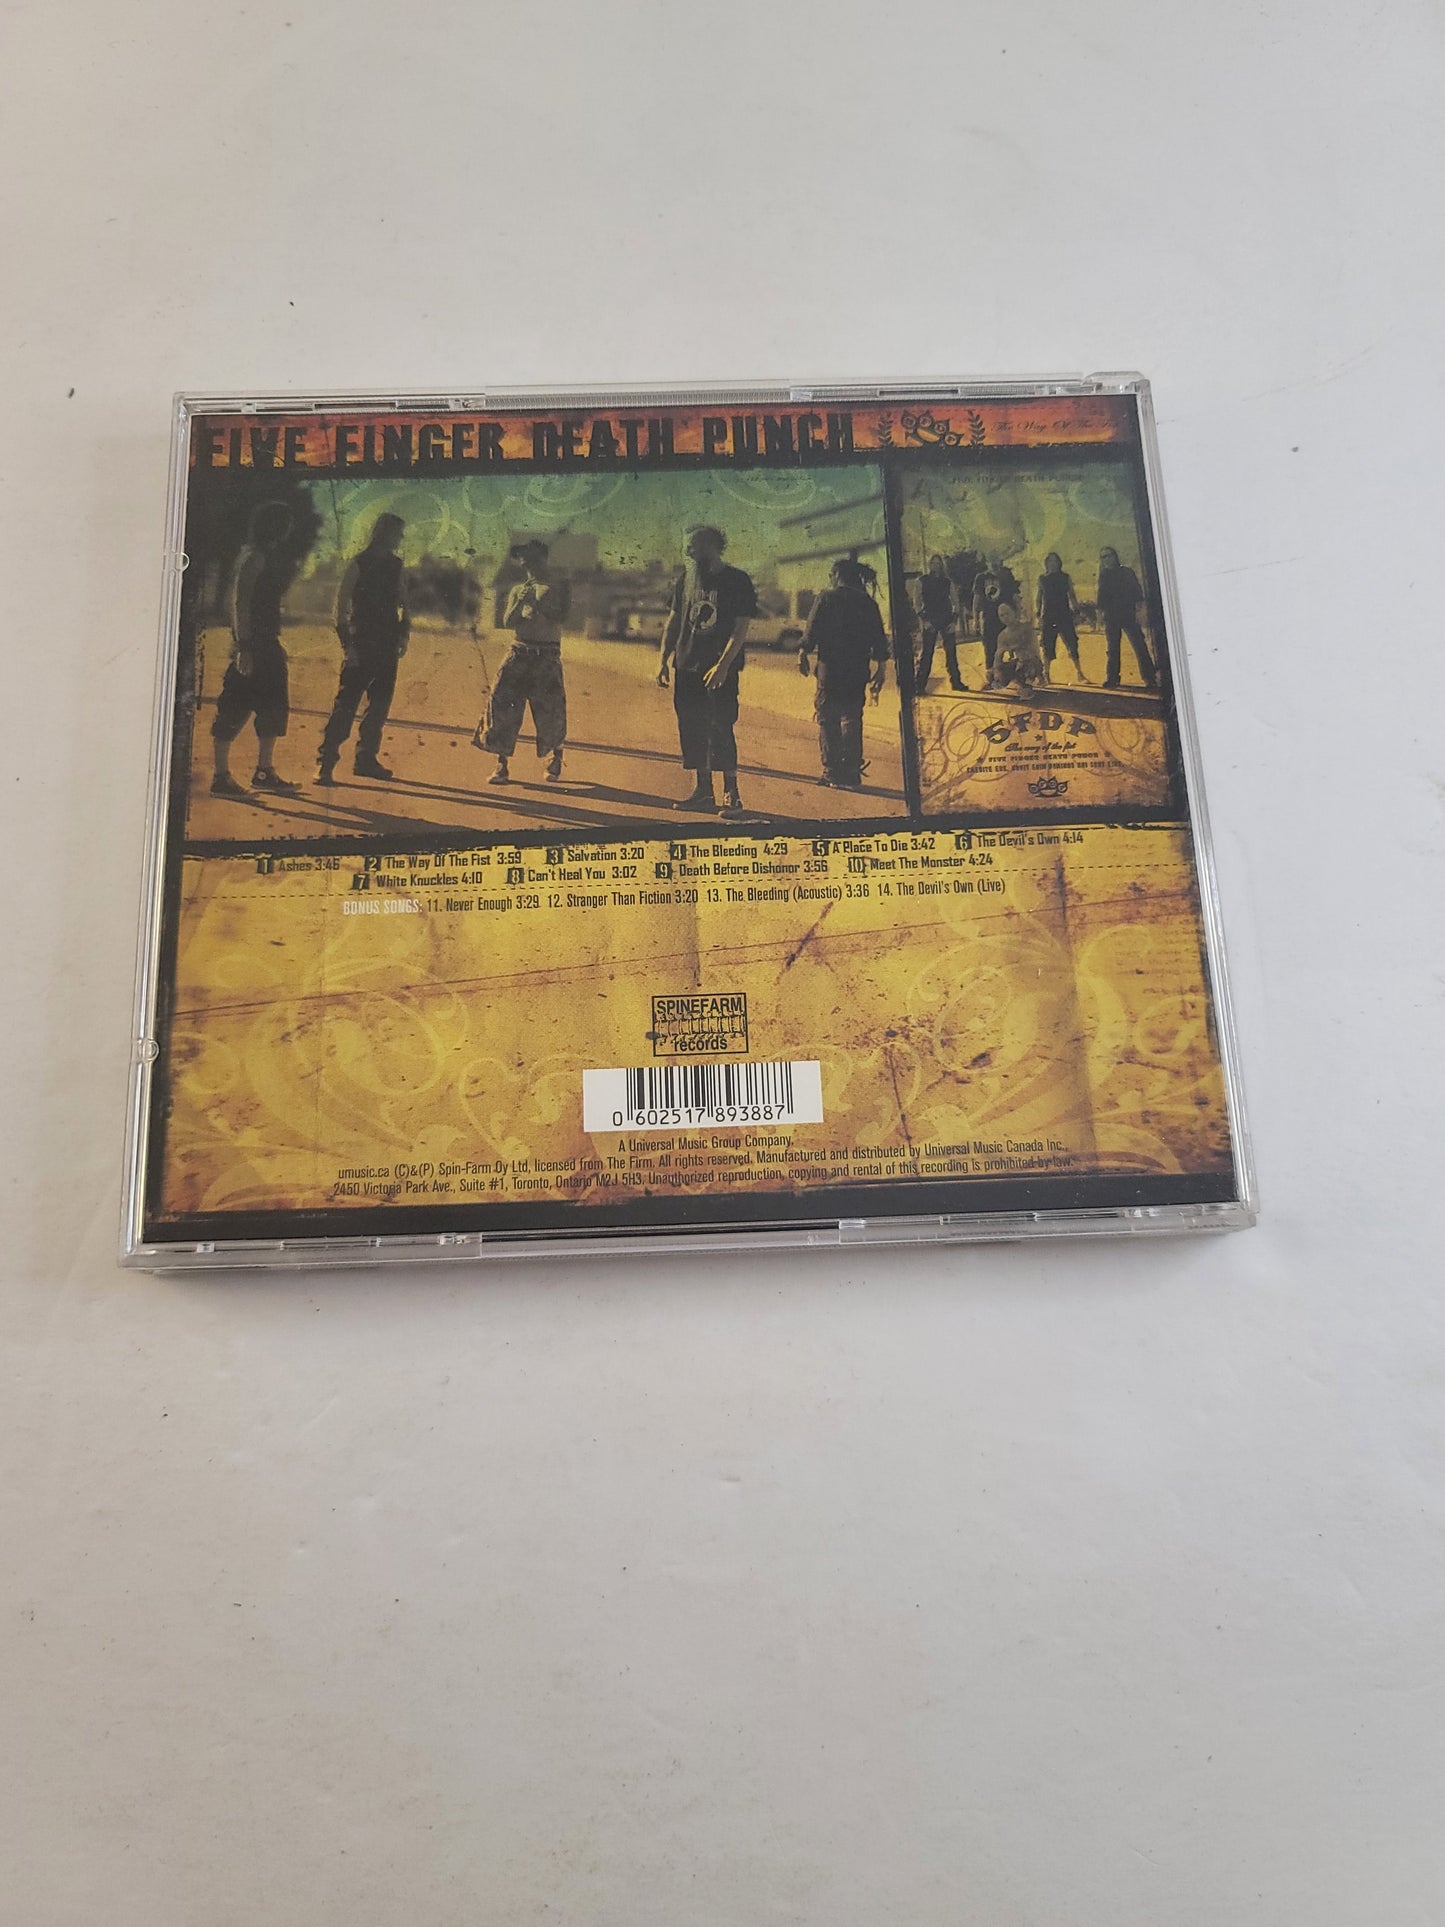 The Way of the Fist by Five Finger Death Punch (CD, Nov-2008, Universal)